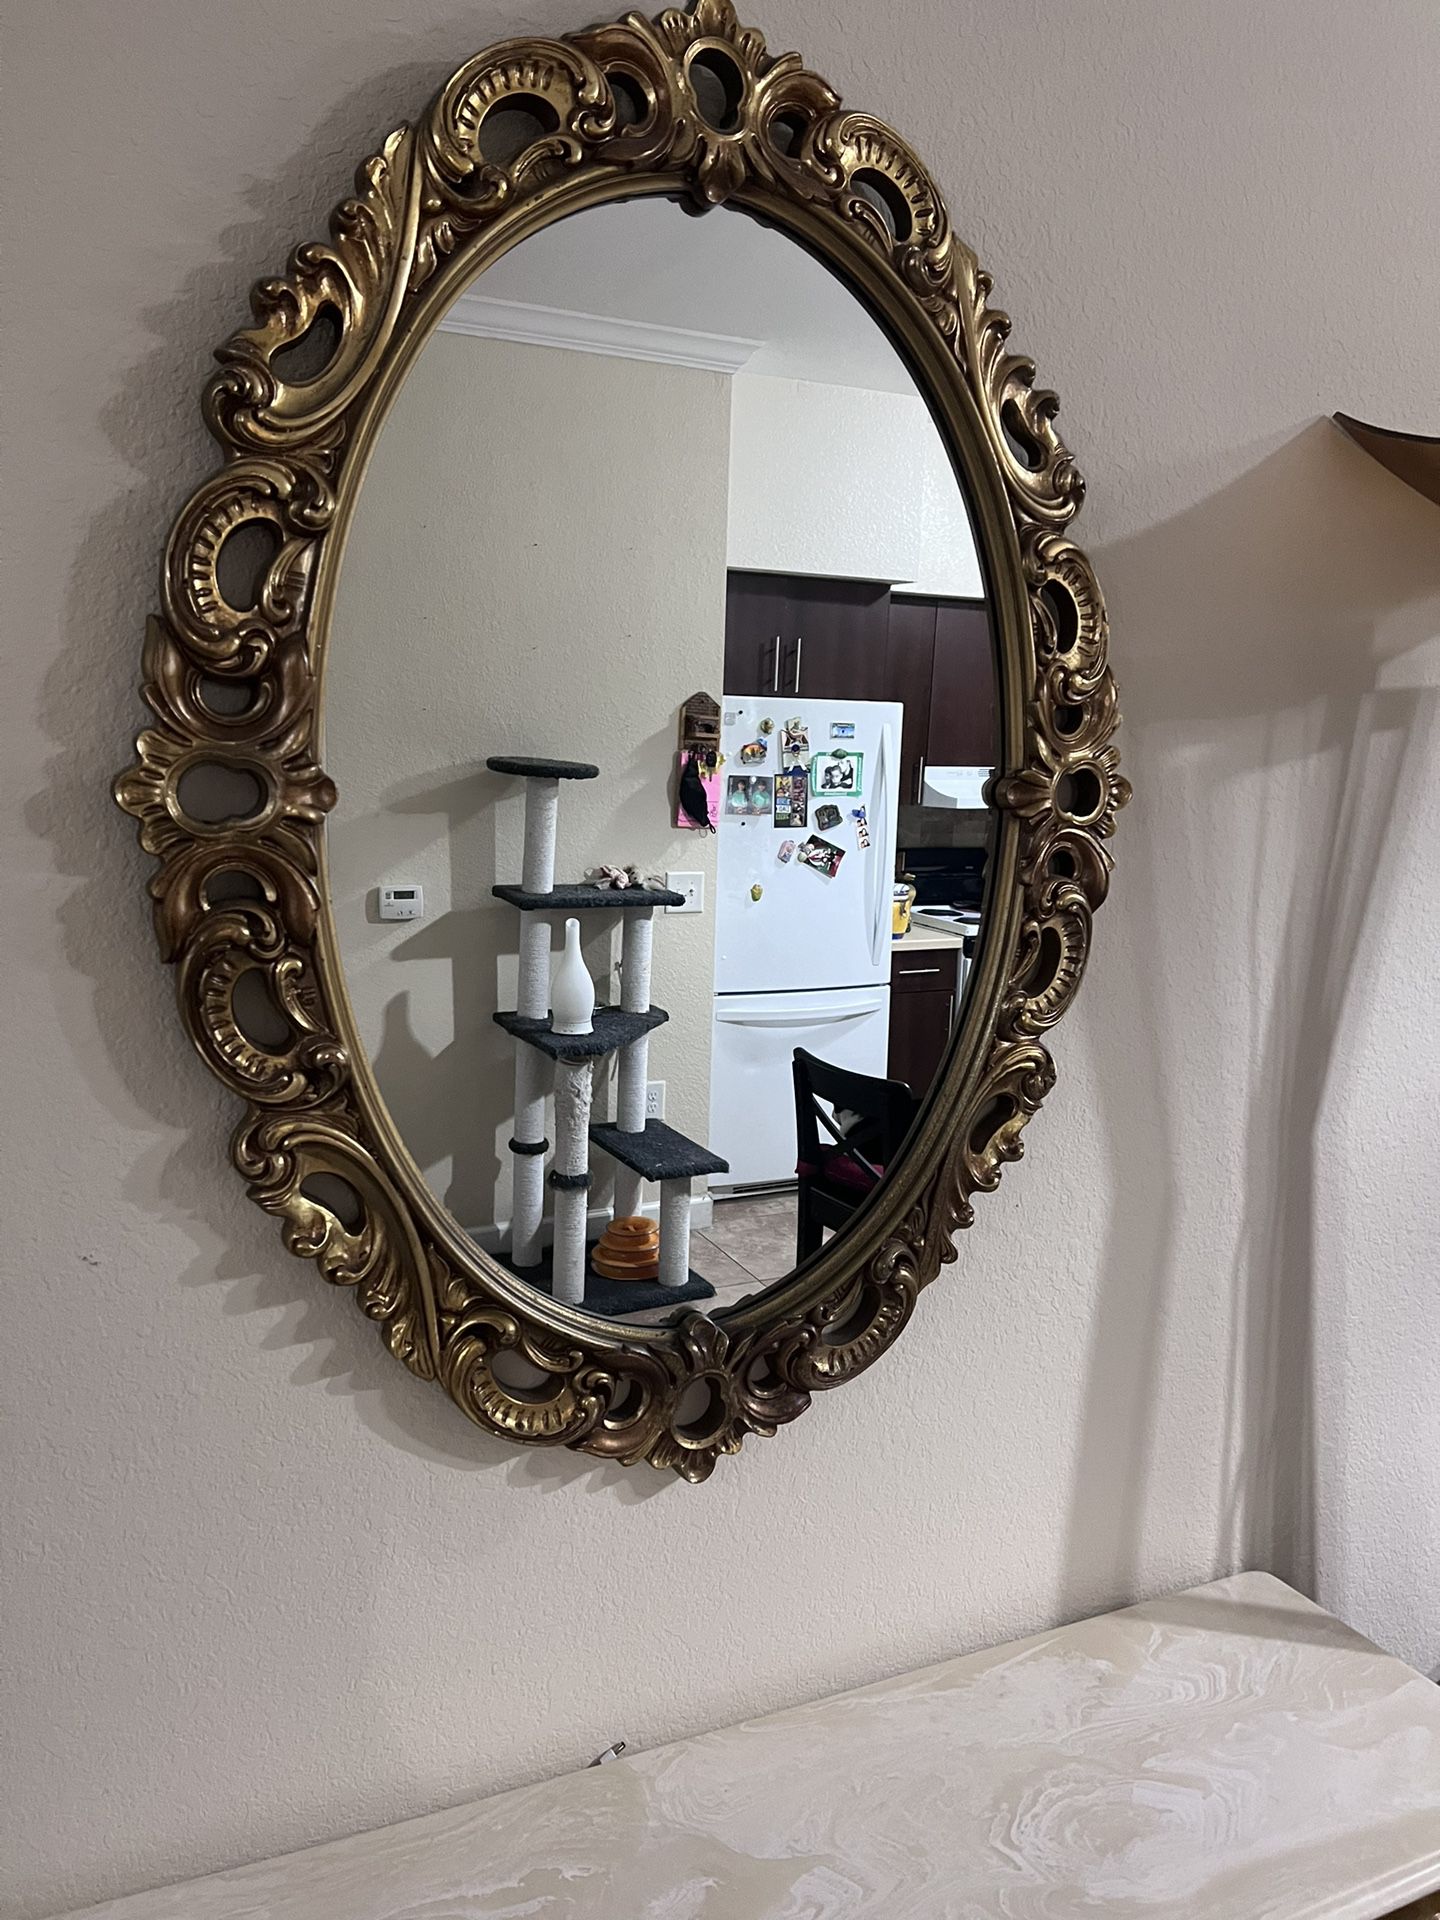 New LV Console Table + Mirror Set for Sale in Fort Lauderdale, FL - OfferUp